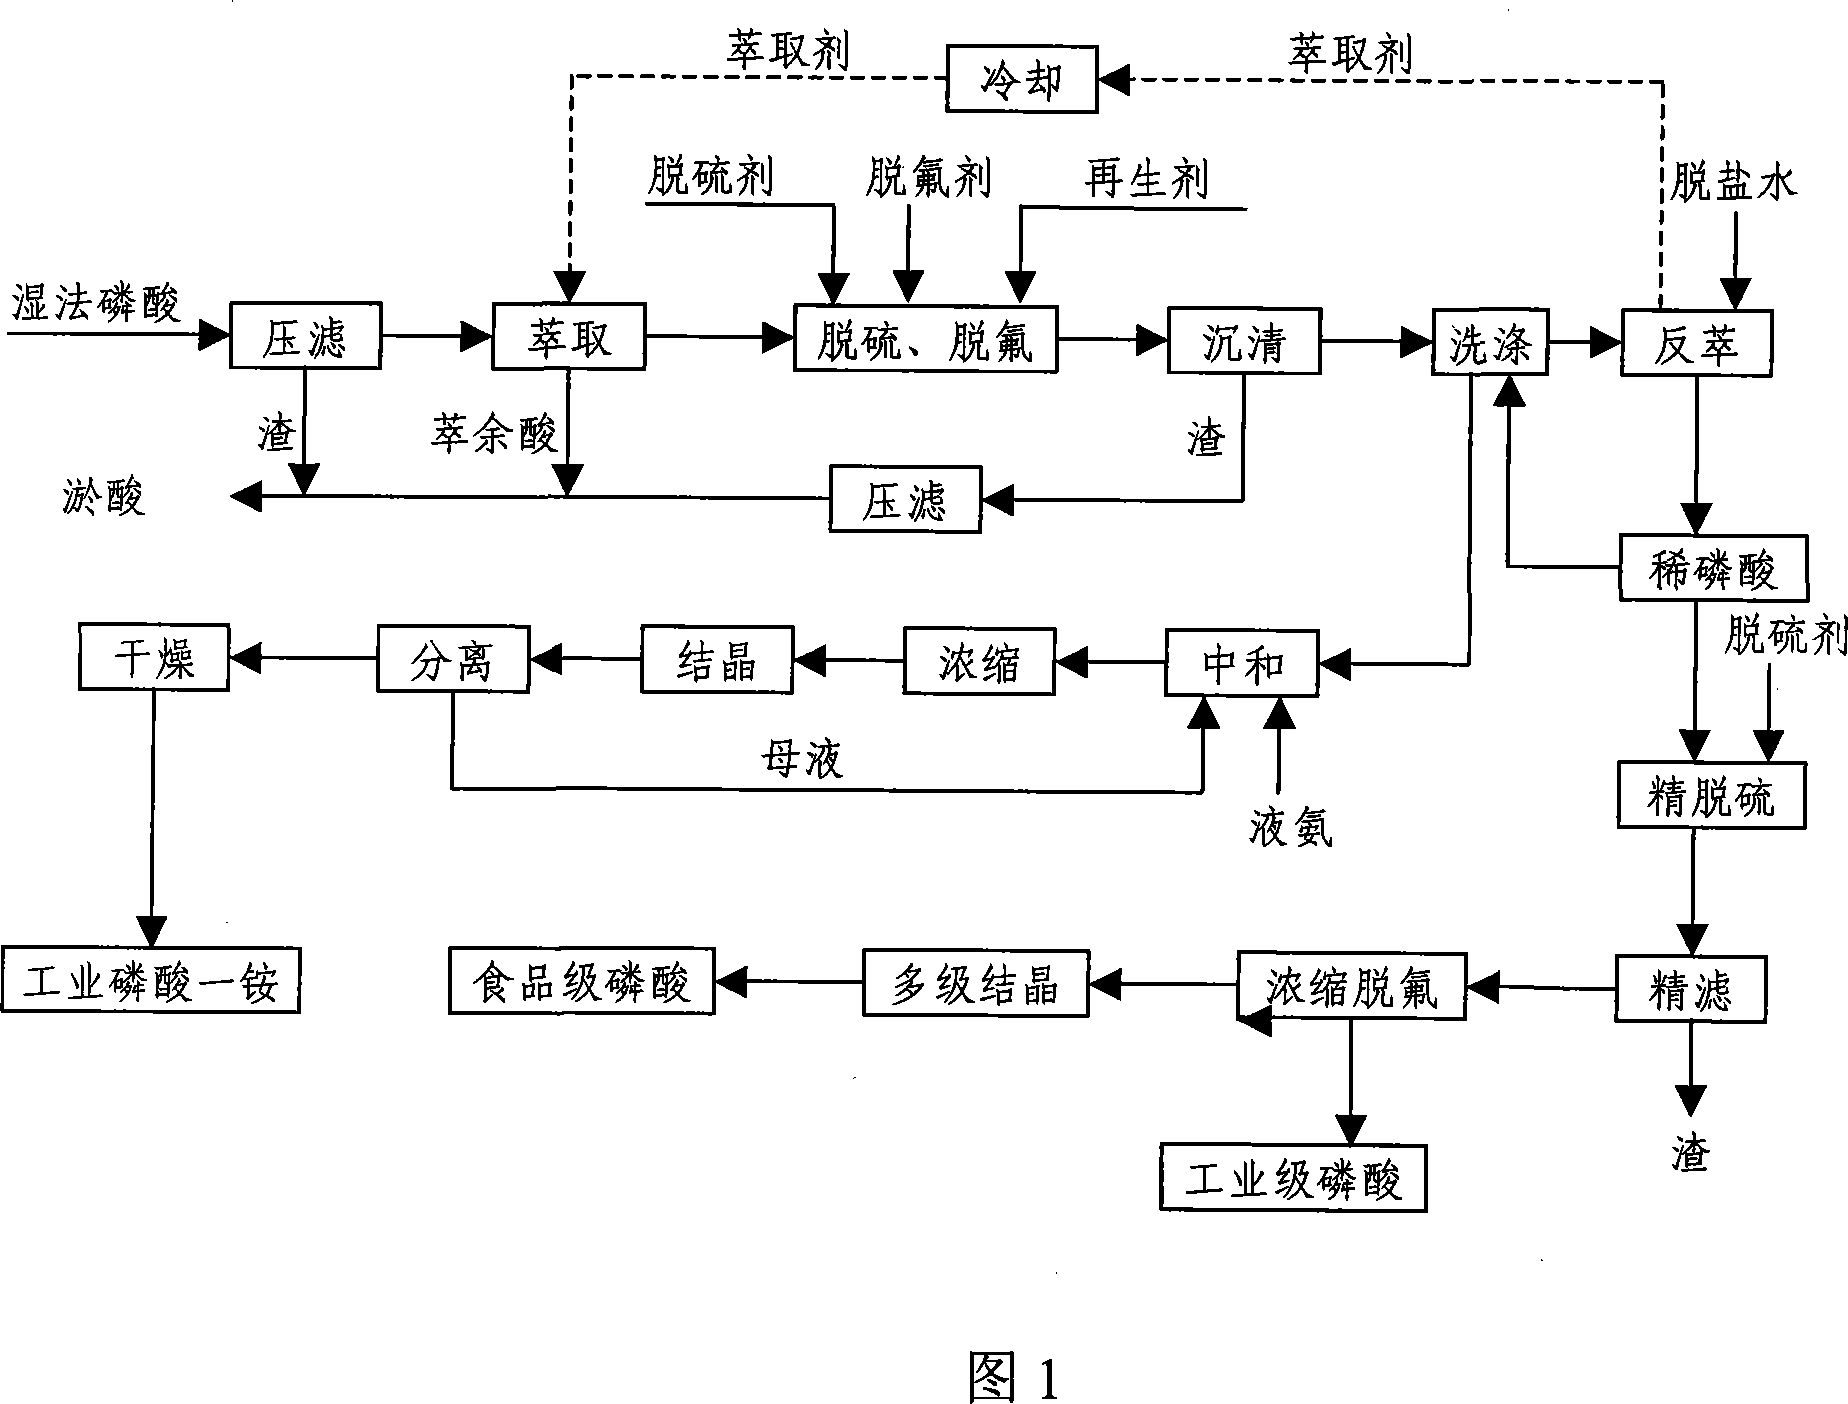 Method for producing technical grade ribose phosphate, food grade ribose phosphate and industry ammonium diacid phosphate using wet-process ribose phosphate